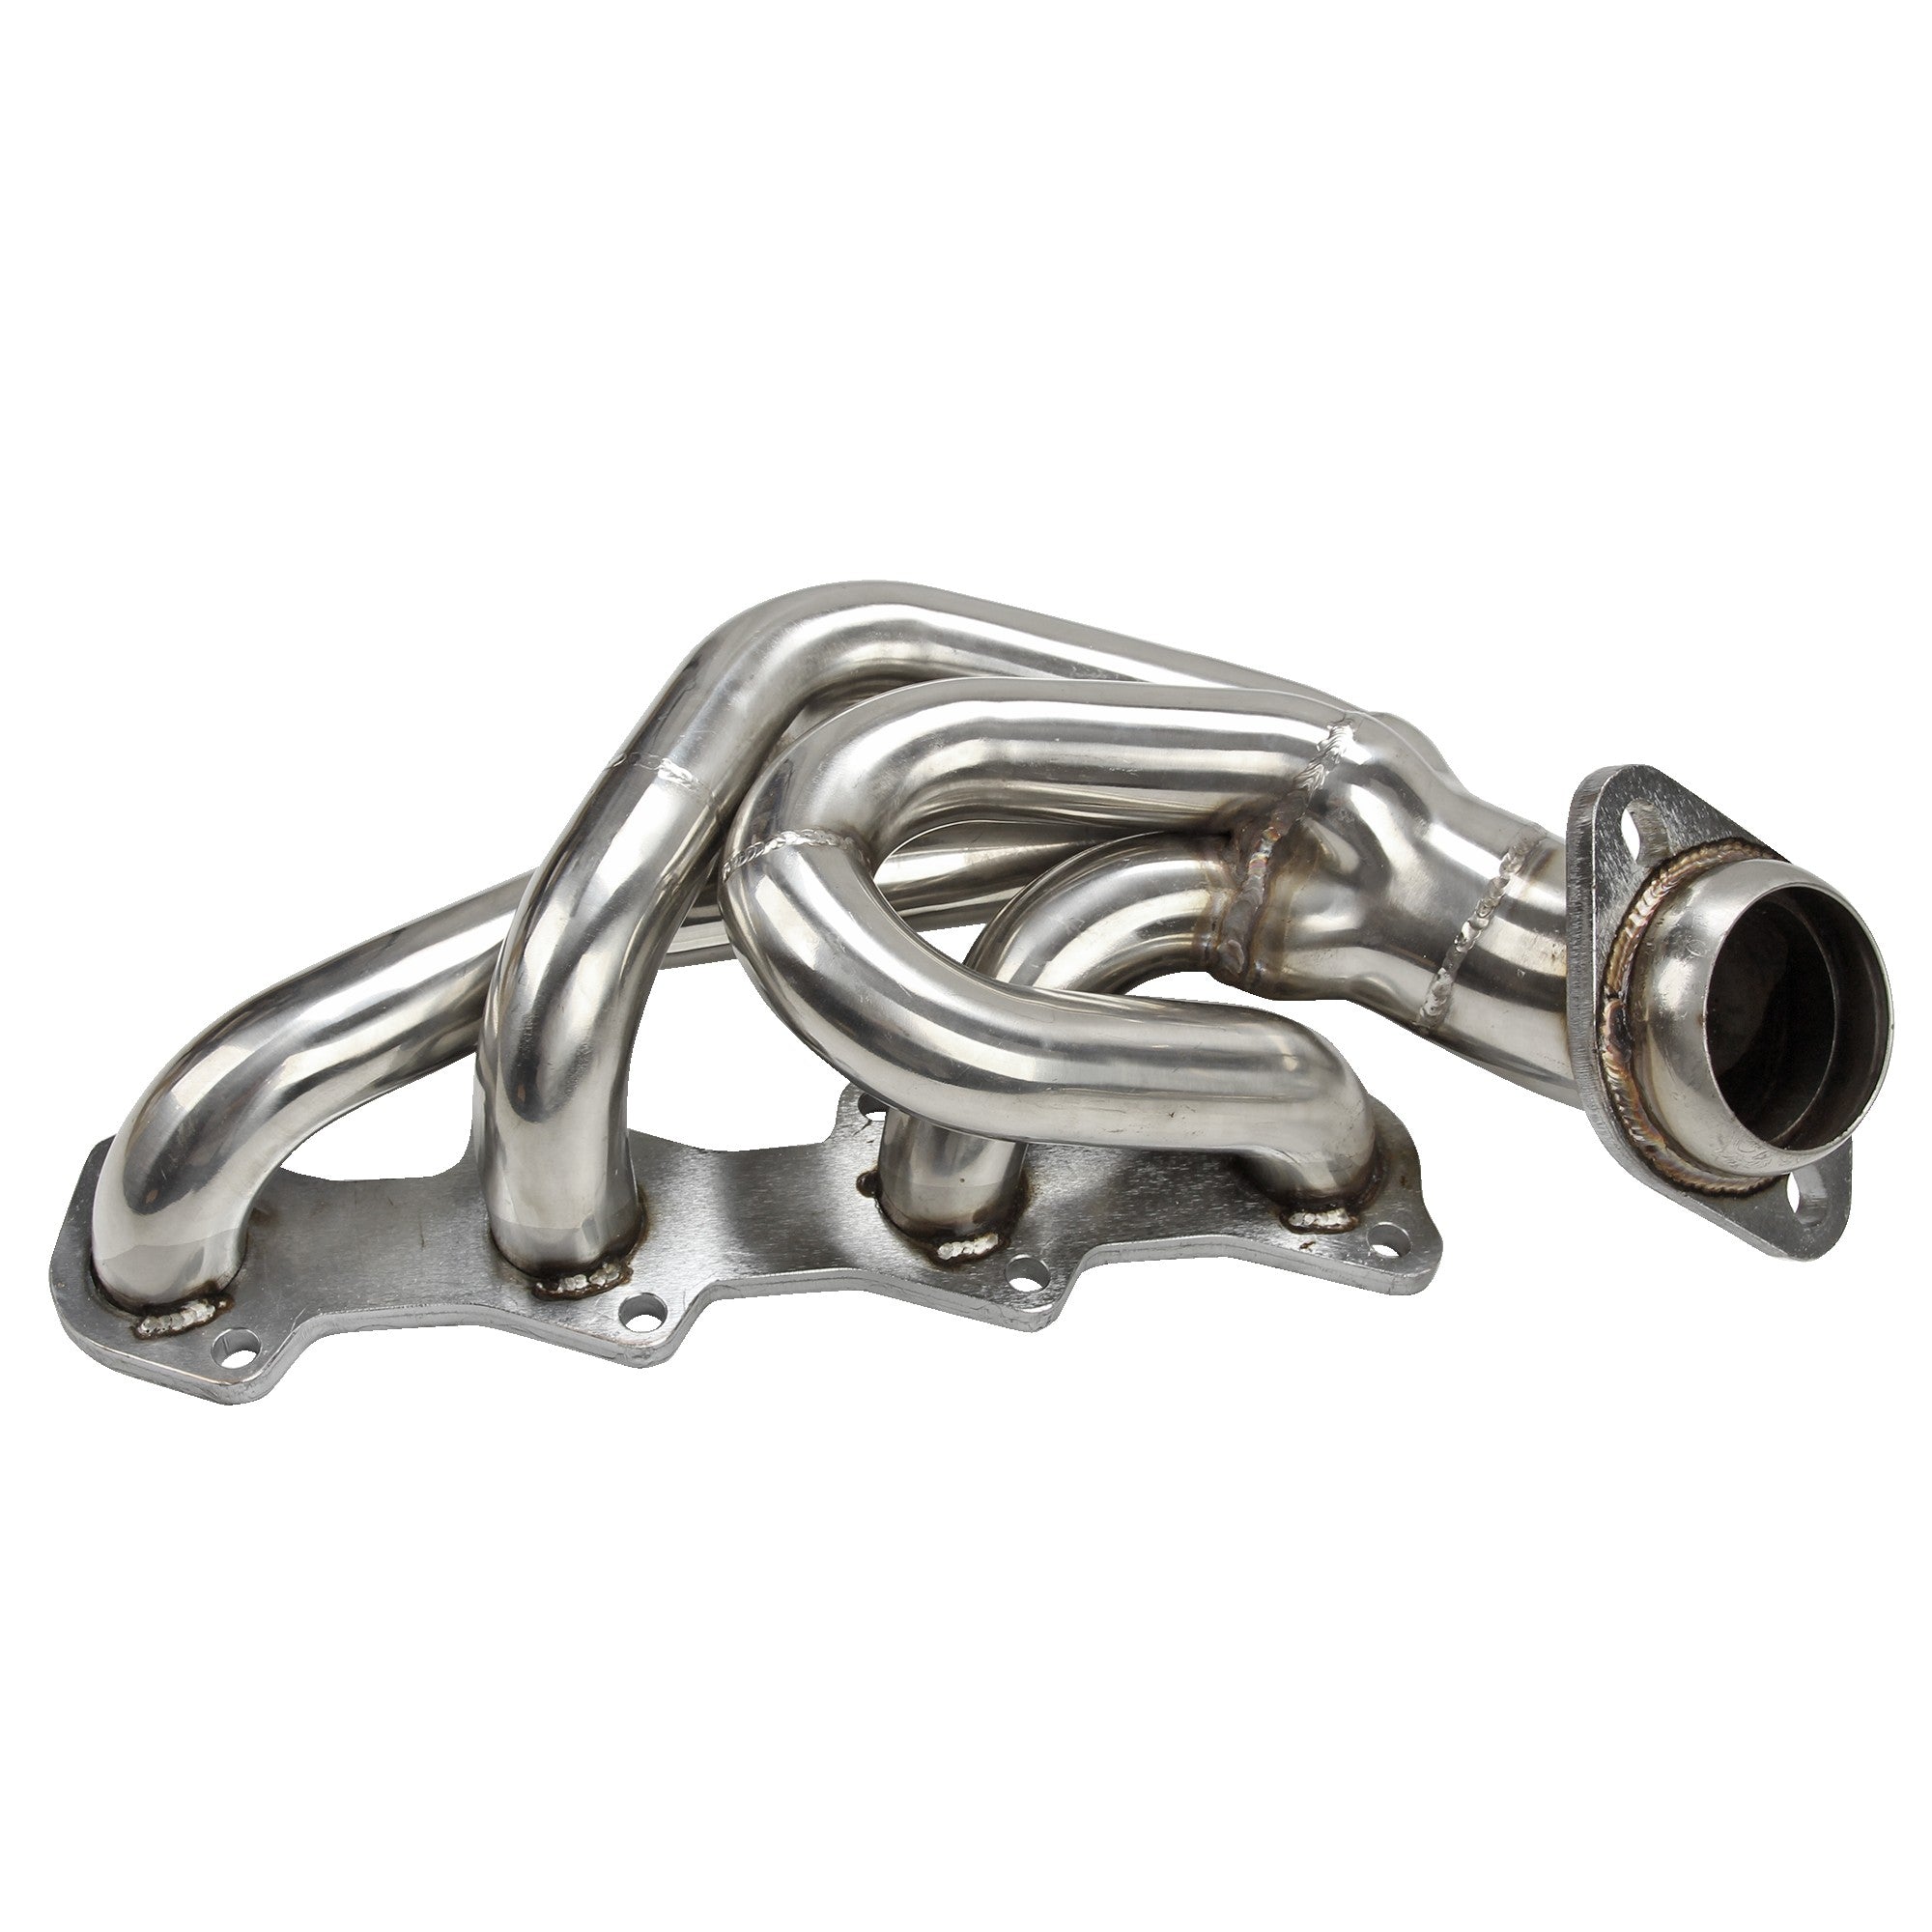 Exhaust Header for 1999-2004 Ford F250/F350/F450 Super Duty V10 and 1997-2001 F150 F250 5.4L V8 Flashark